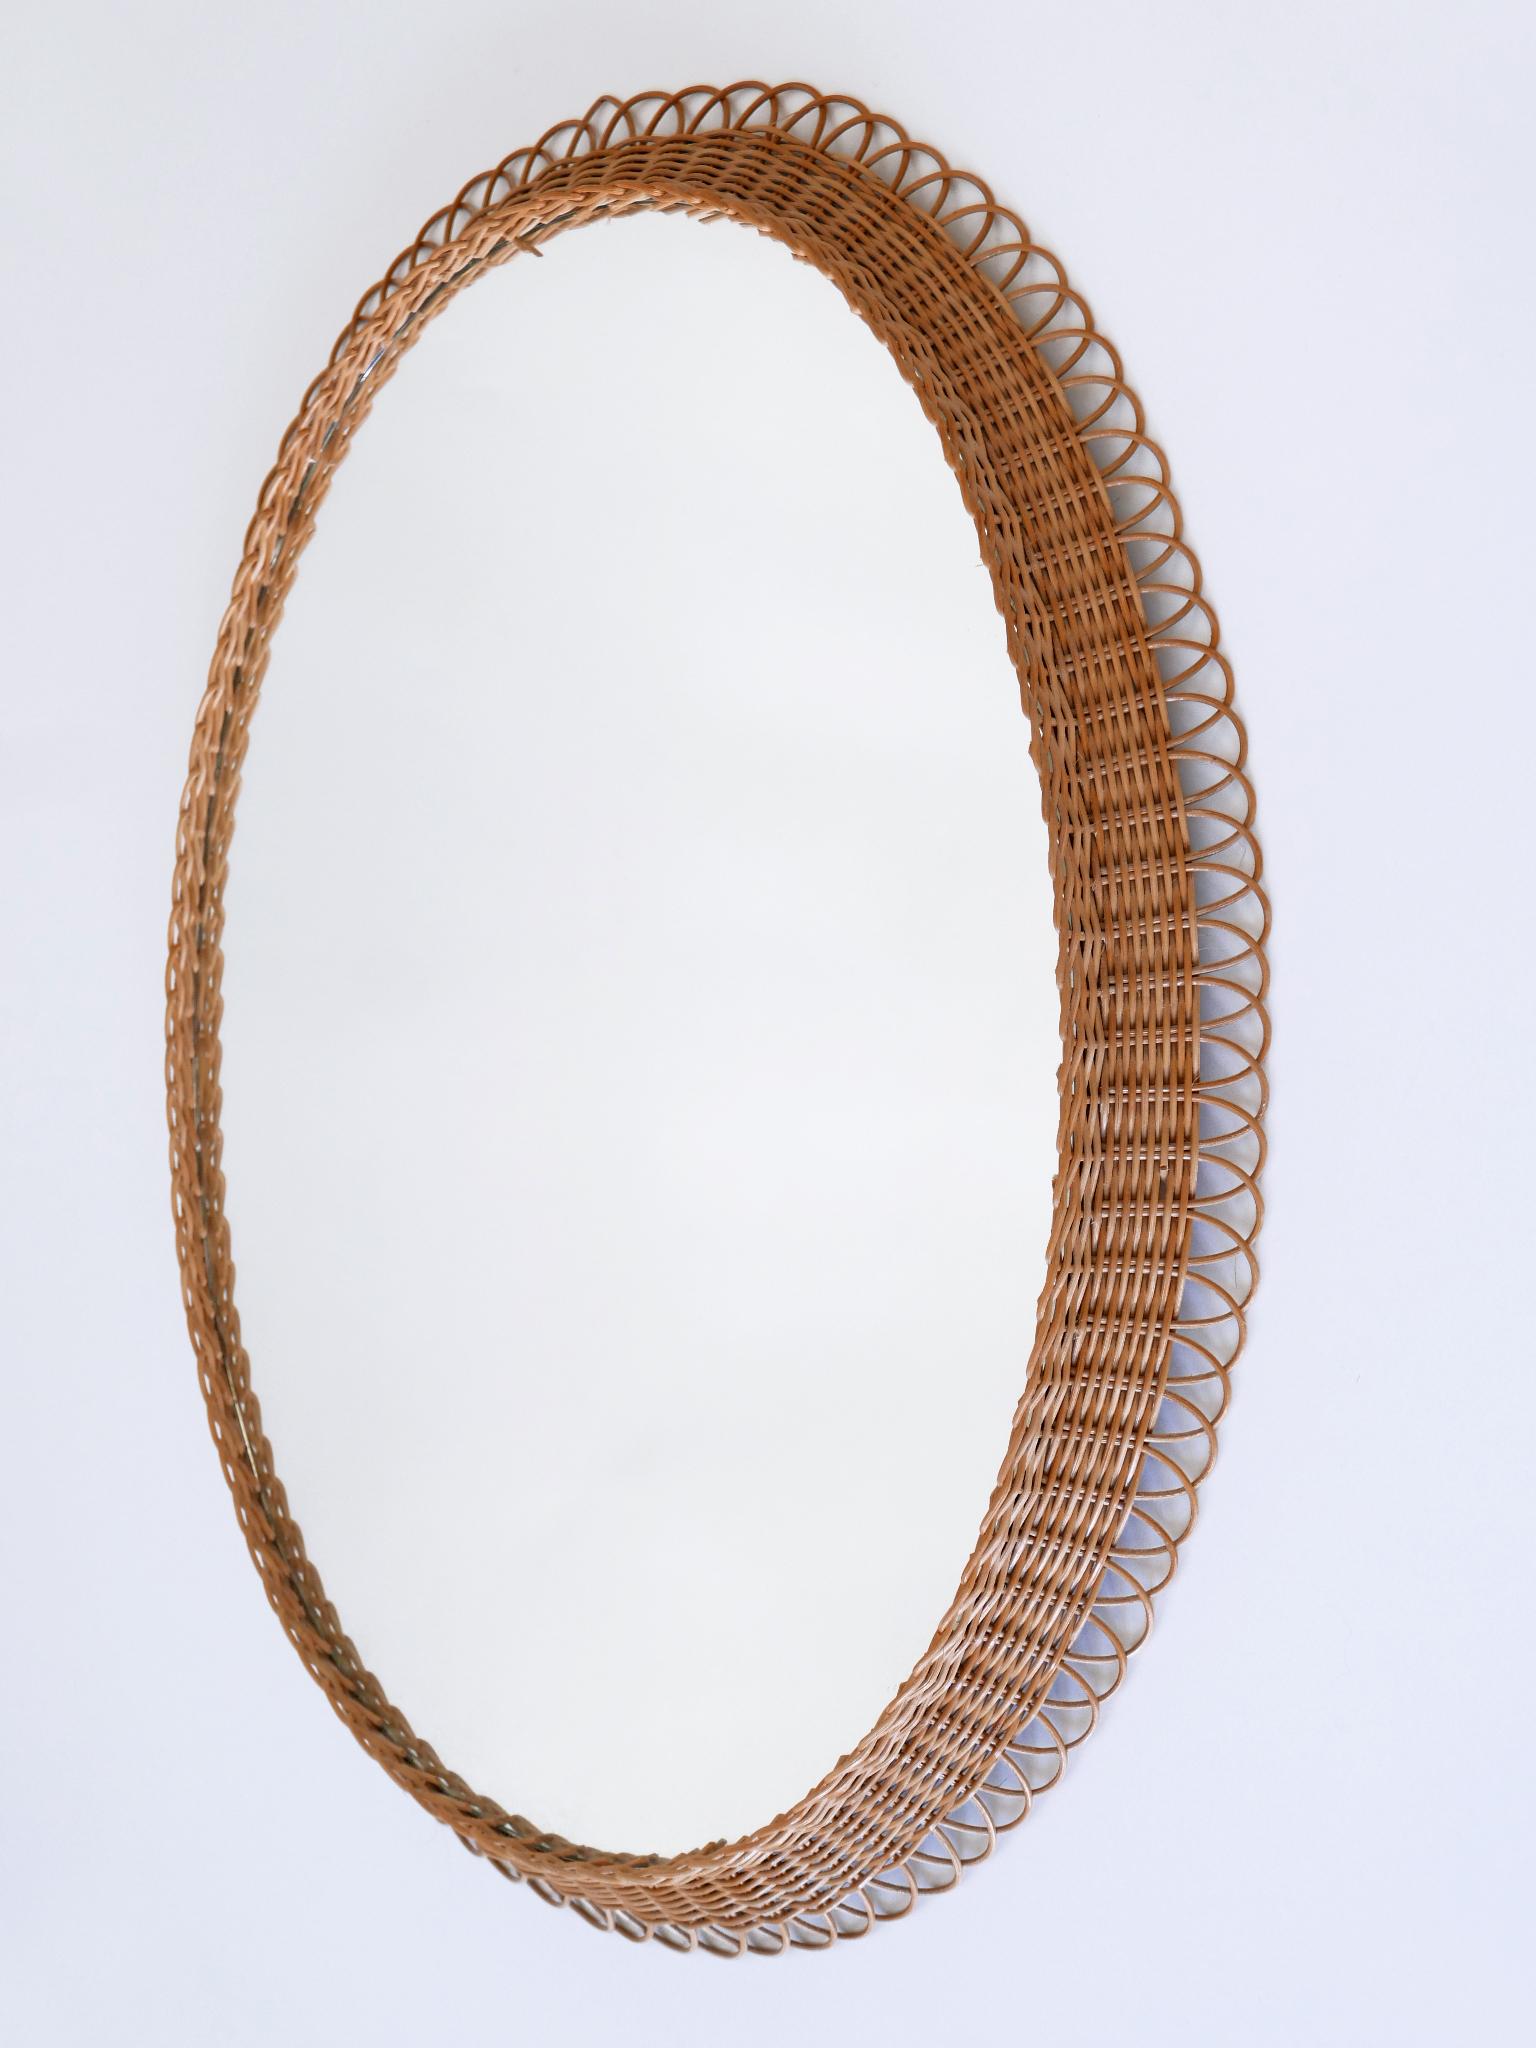 Decorative Mid-Century Modern Rattan Oval Wall Mirror Germany, 1960s For Sale 6